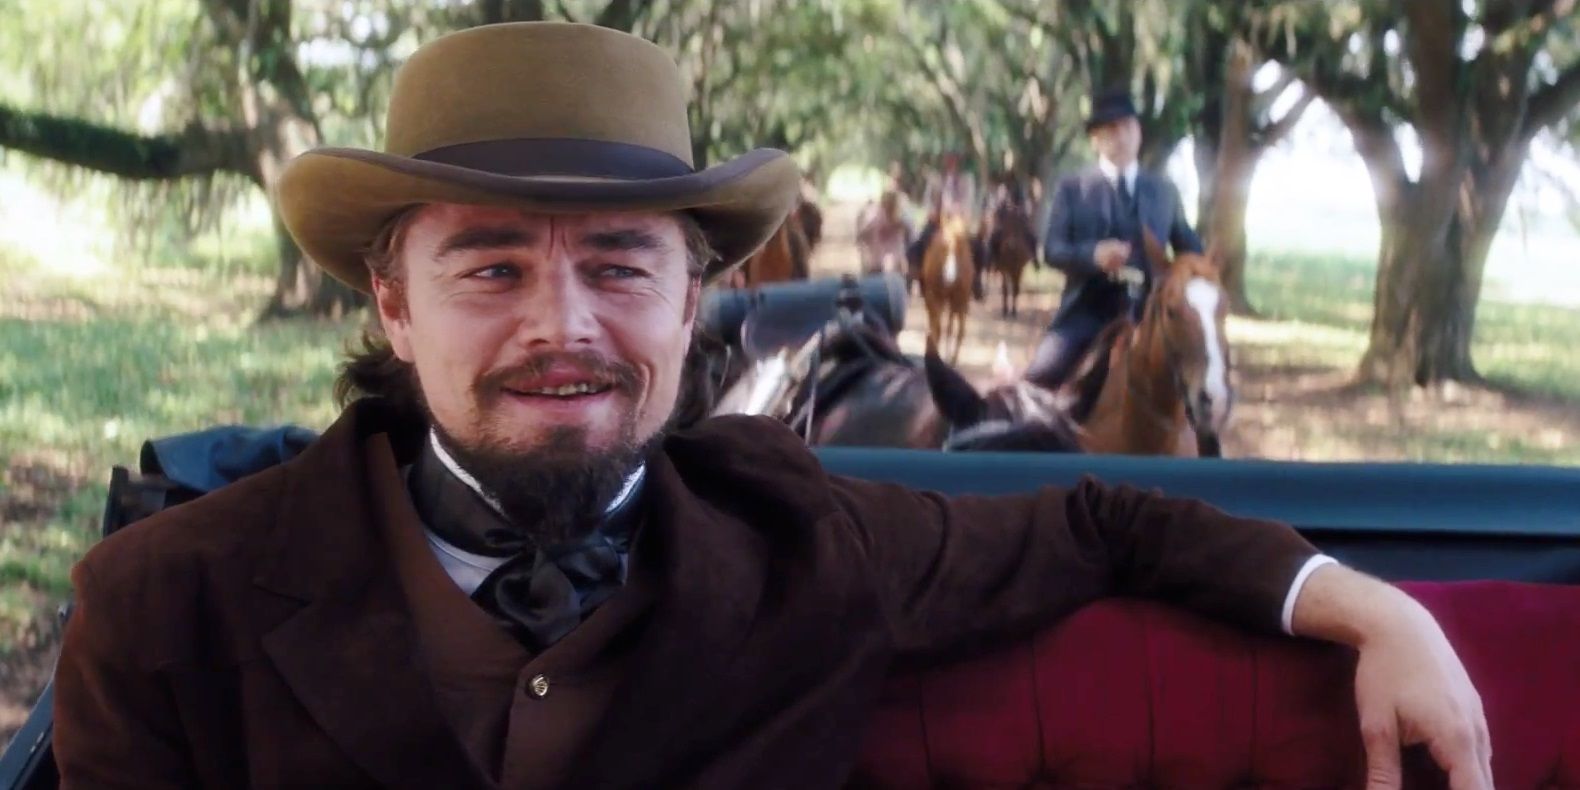 Calvin Candie grins while riding to his plantation in Django Unchained